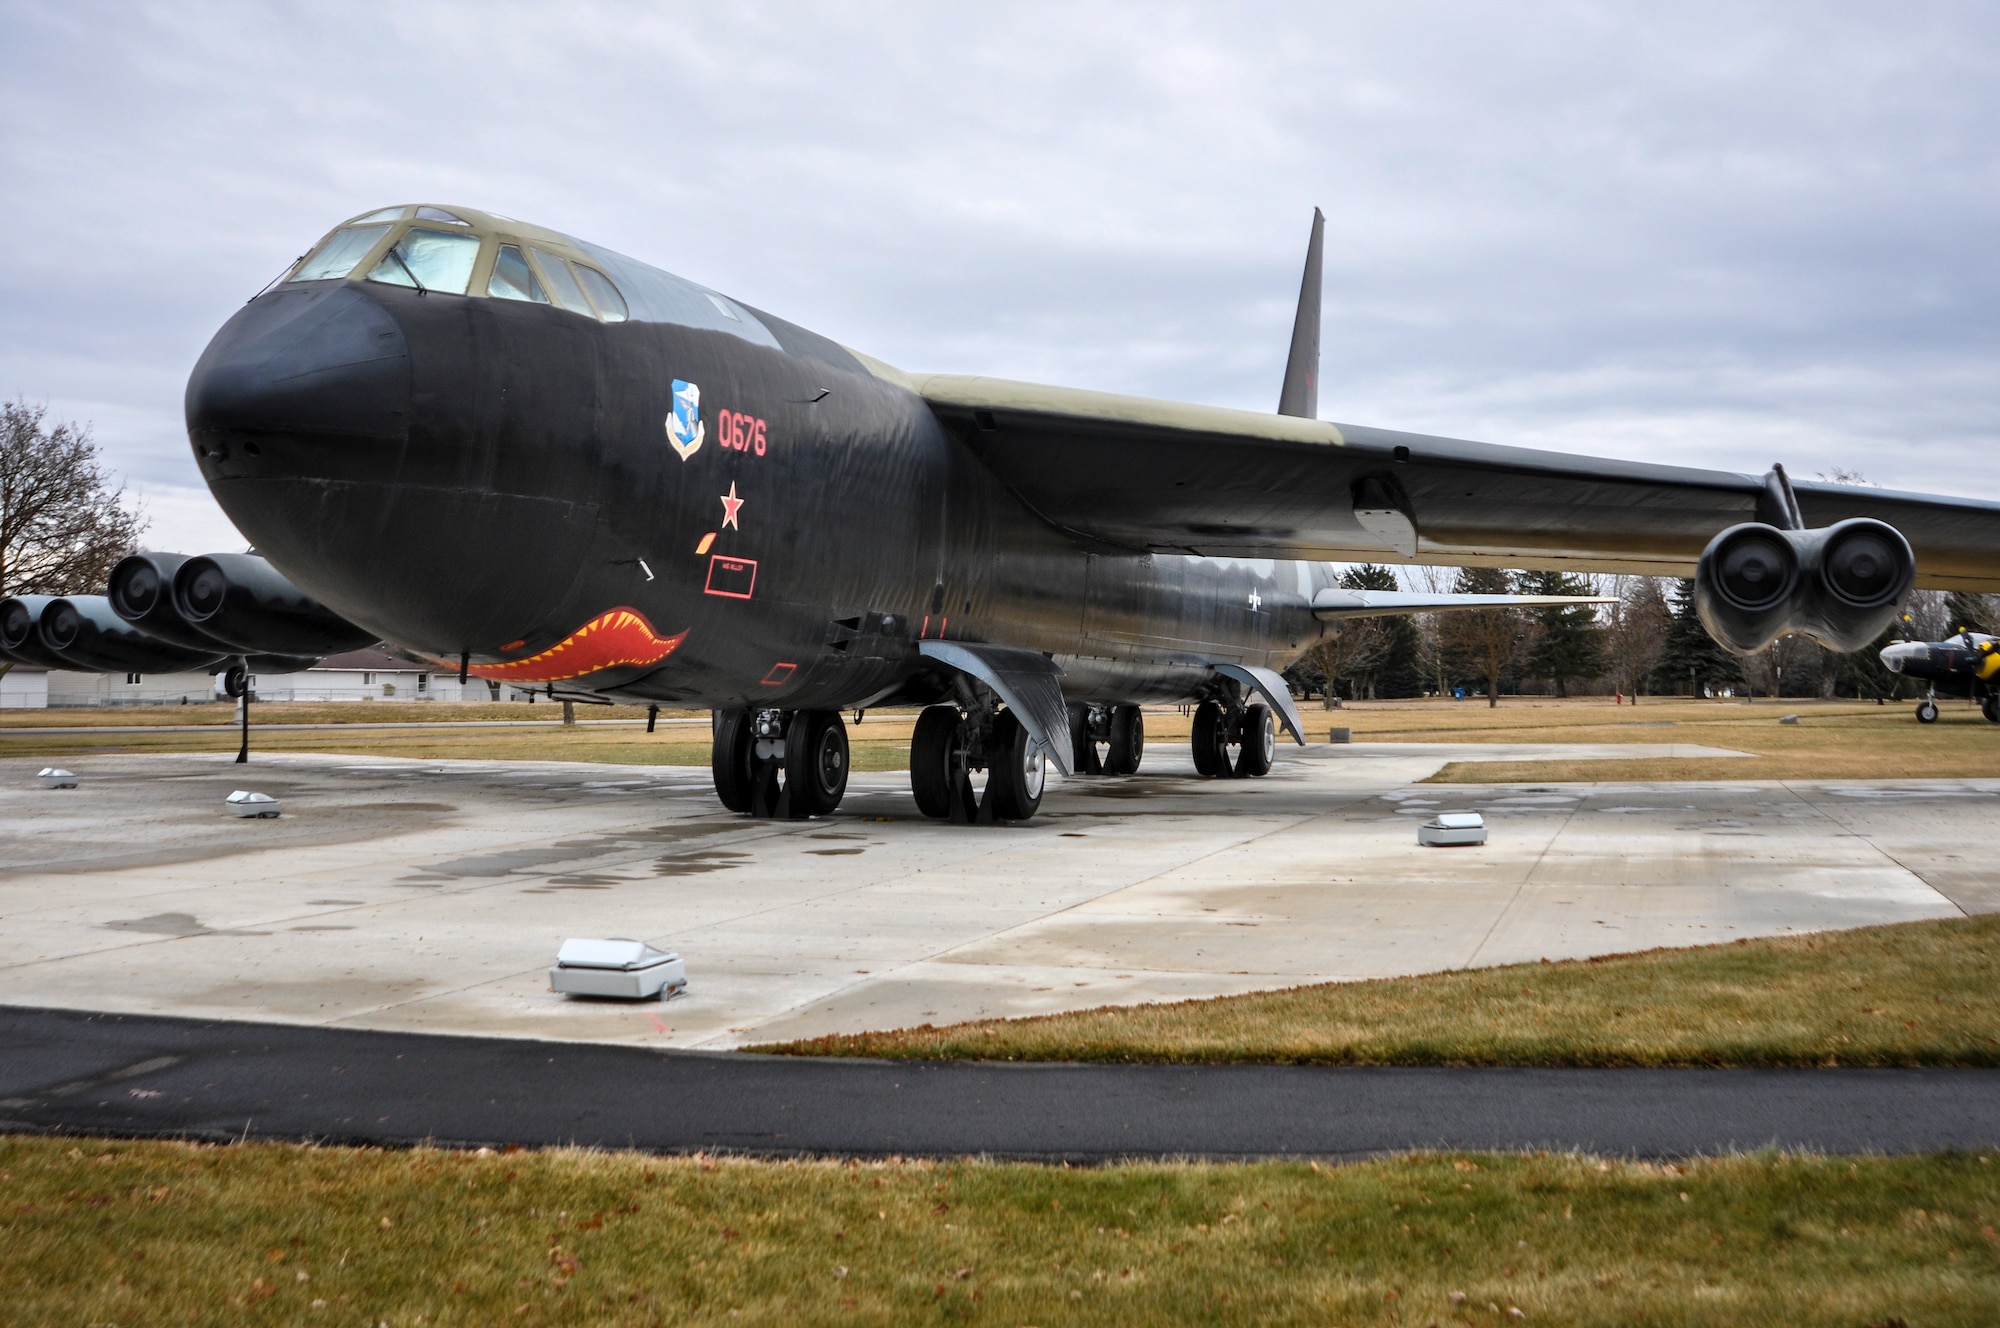 A B-52 Stratofortress static display, tail “676,” sits dominantly at the Fairchild Air Force Base, Wash., Heritage Park Dec. 18, 2013. The same day in 1972, during Linebacker II operations over North Vietnam, “676” became the first B-52 to shoot down an enemy MiG aircraft. The tail gunner, Staff Sgt. Samuel O. Turner, fired his 50-caliber machine guns at a MiG-21 as it moved in to attack the B-52. Turner reported a “gigantic explosion to the rear of the aircraft” and was credited with being the first tail gunner to log a confirmed kill during combat in a B-52. (U.S. Air Force photo by Scott King/Released)